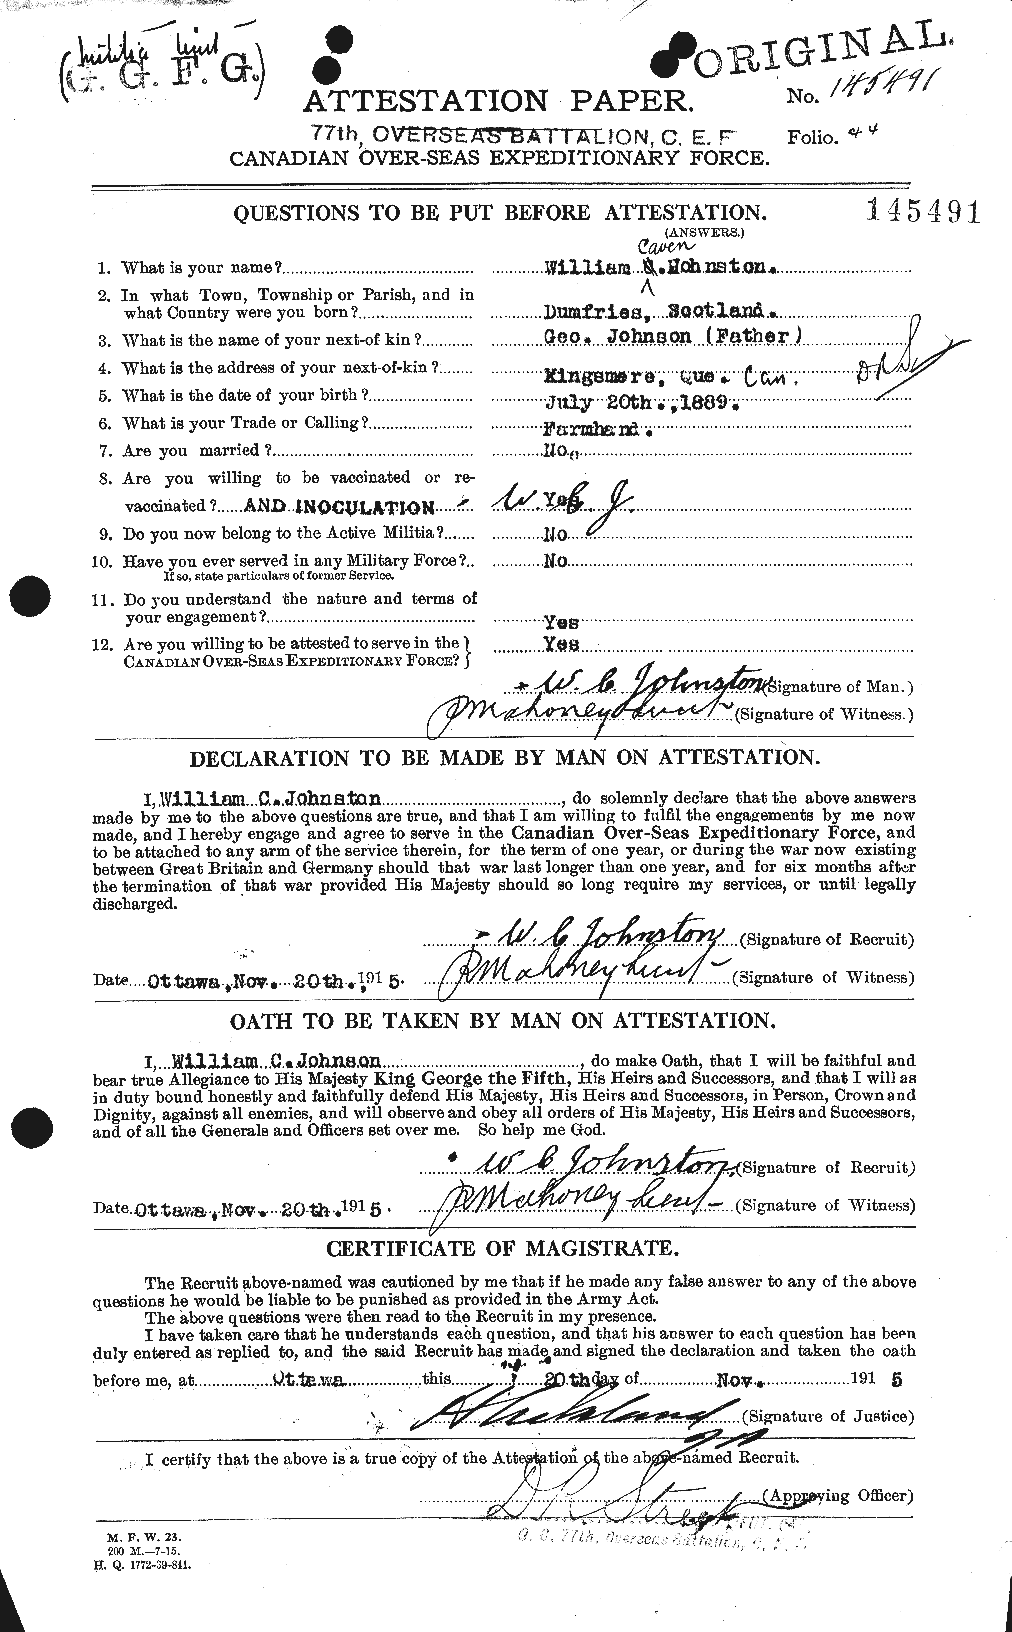 Personnel Records of the First World War - CEF 427308a